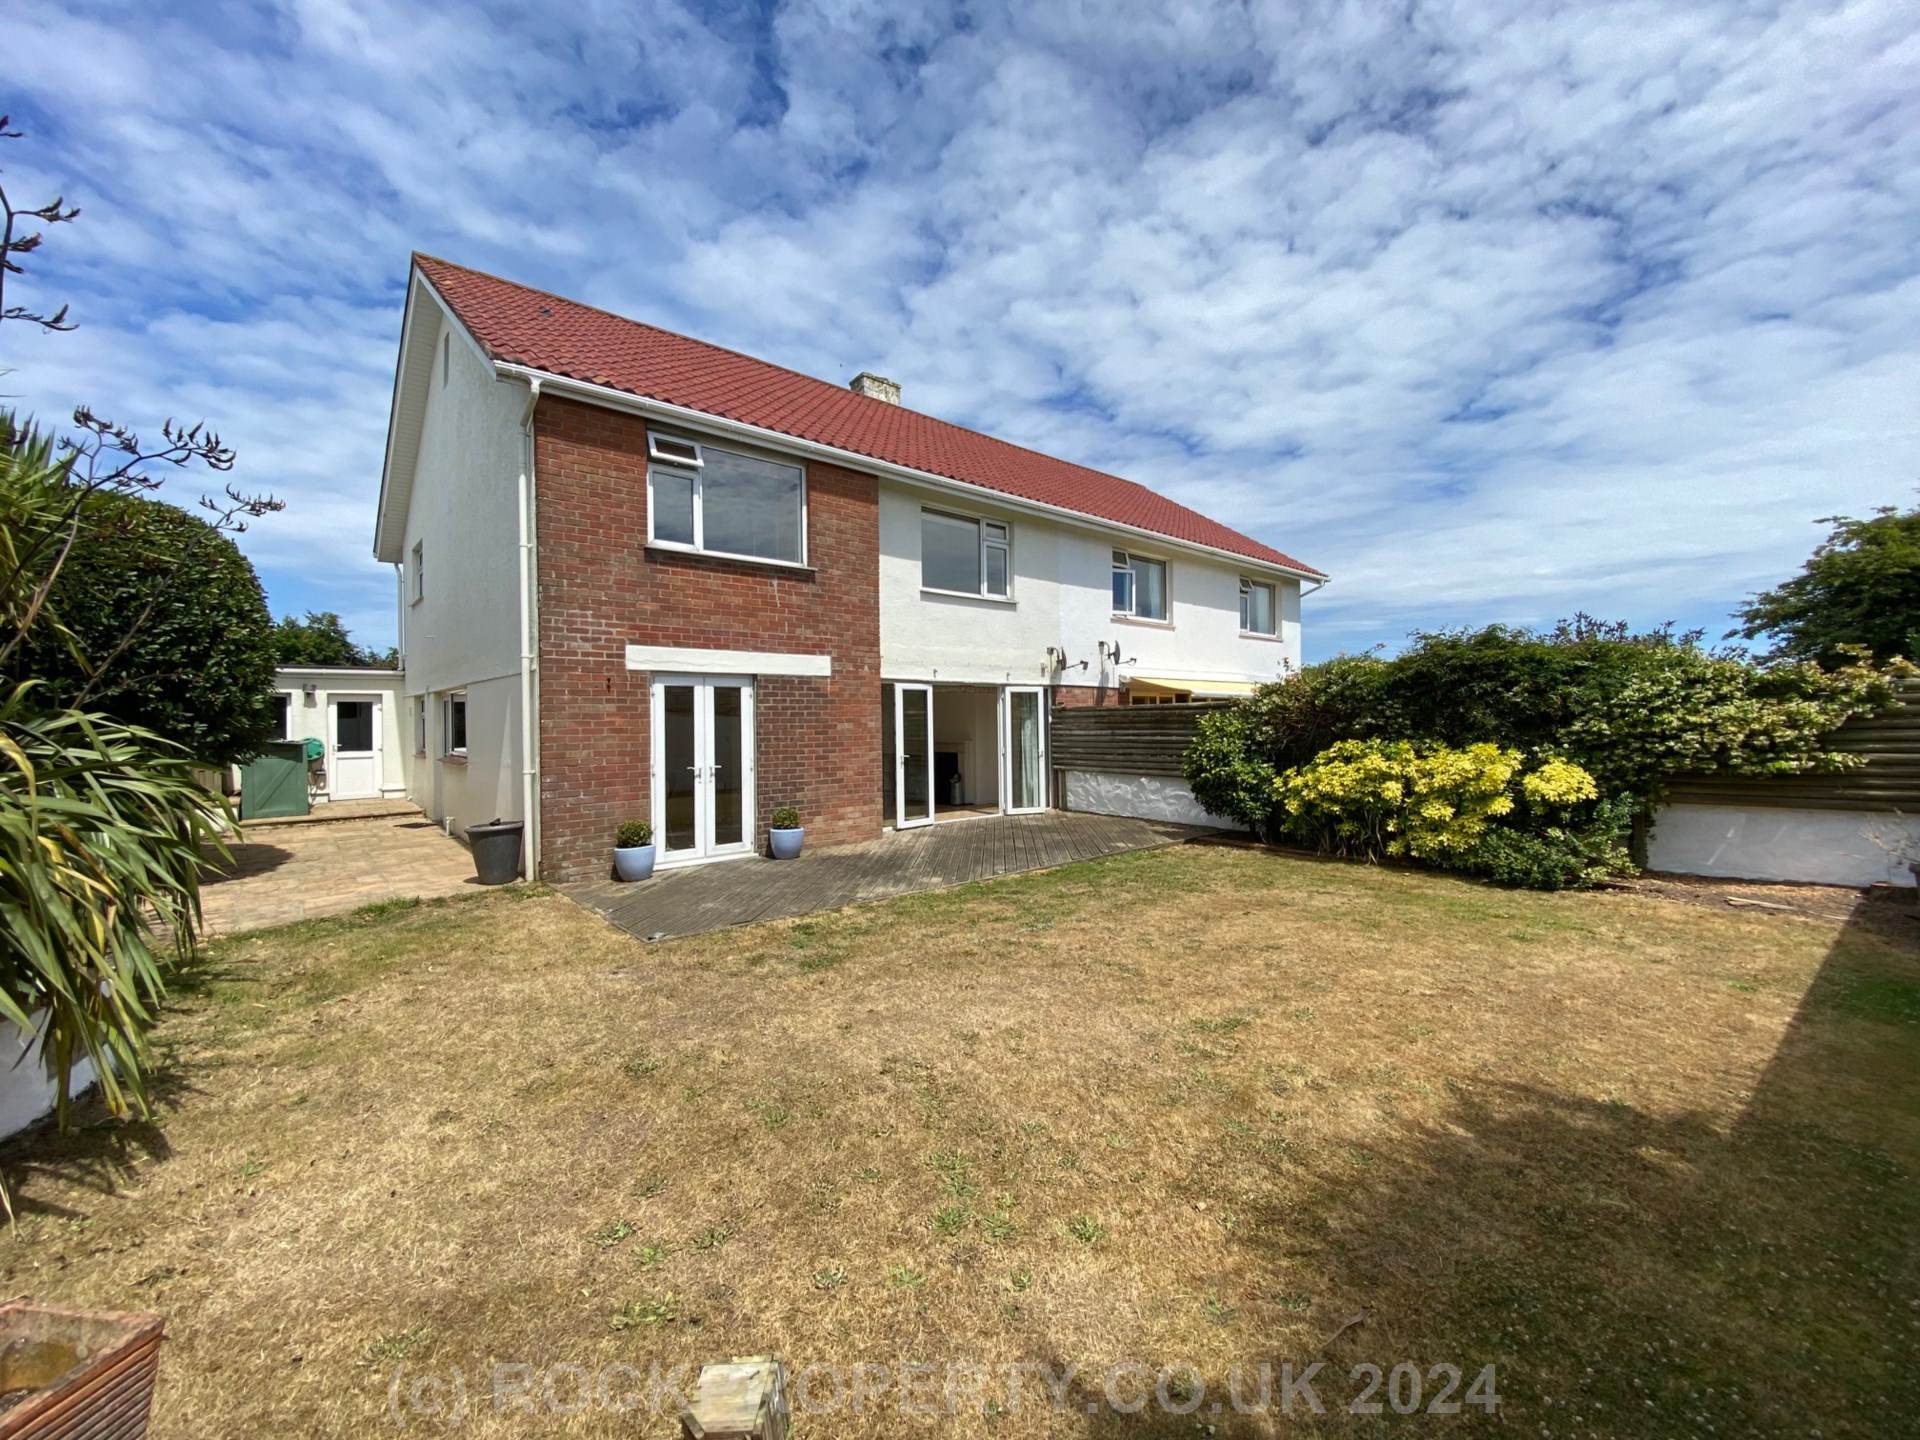 SUBSTANTIAL 3/4 BED FAMILY HOUSE, Outskirts of St Helier, Image 1